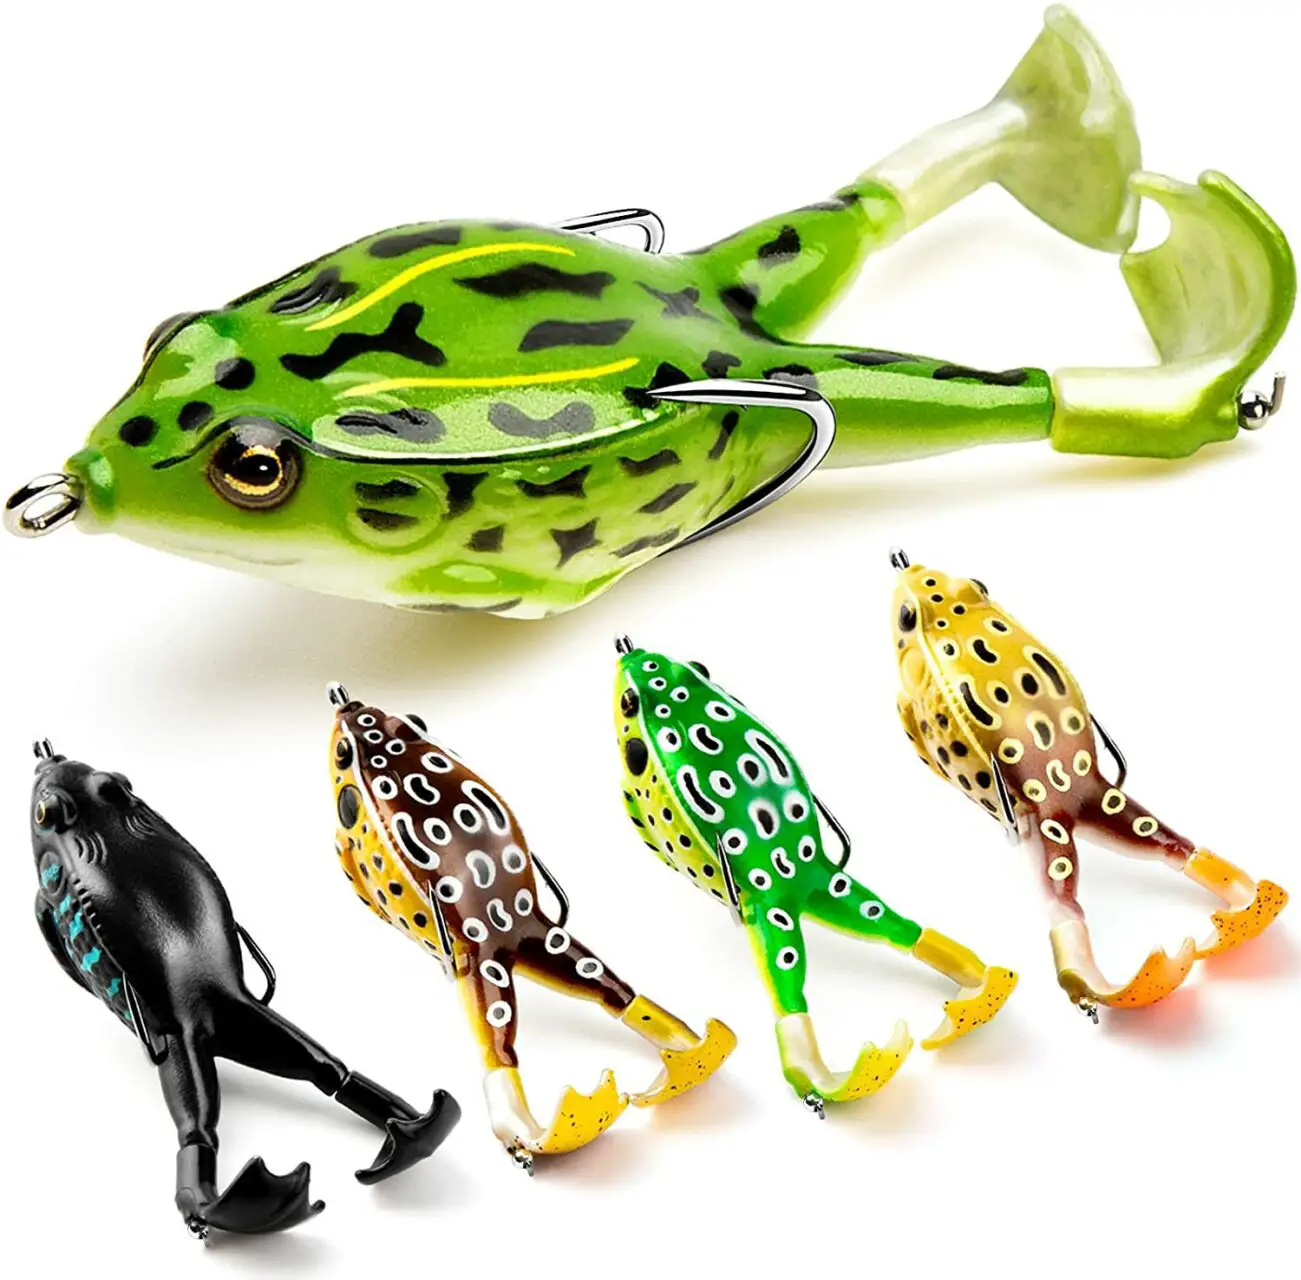 Topwater Frog Lure Bass Trout Fishing